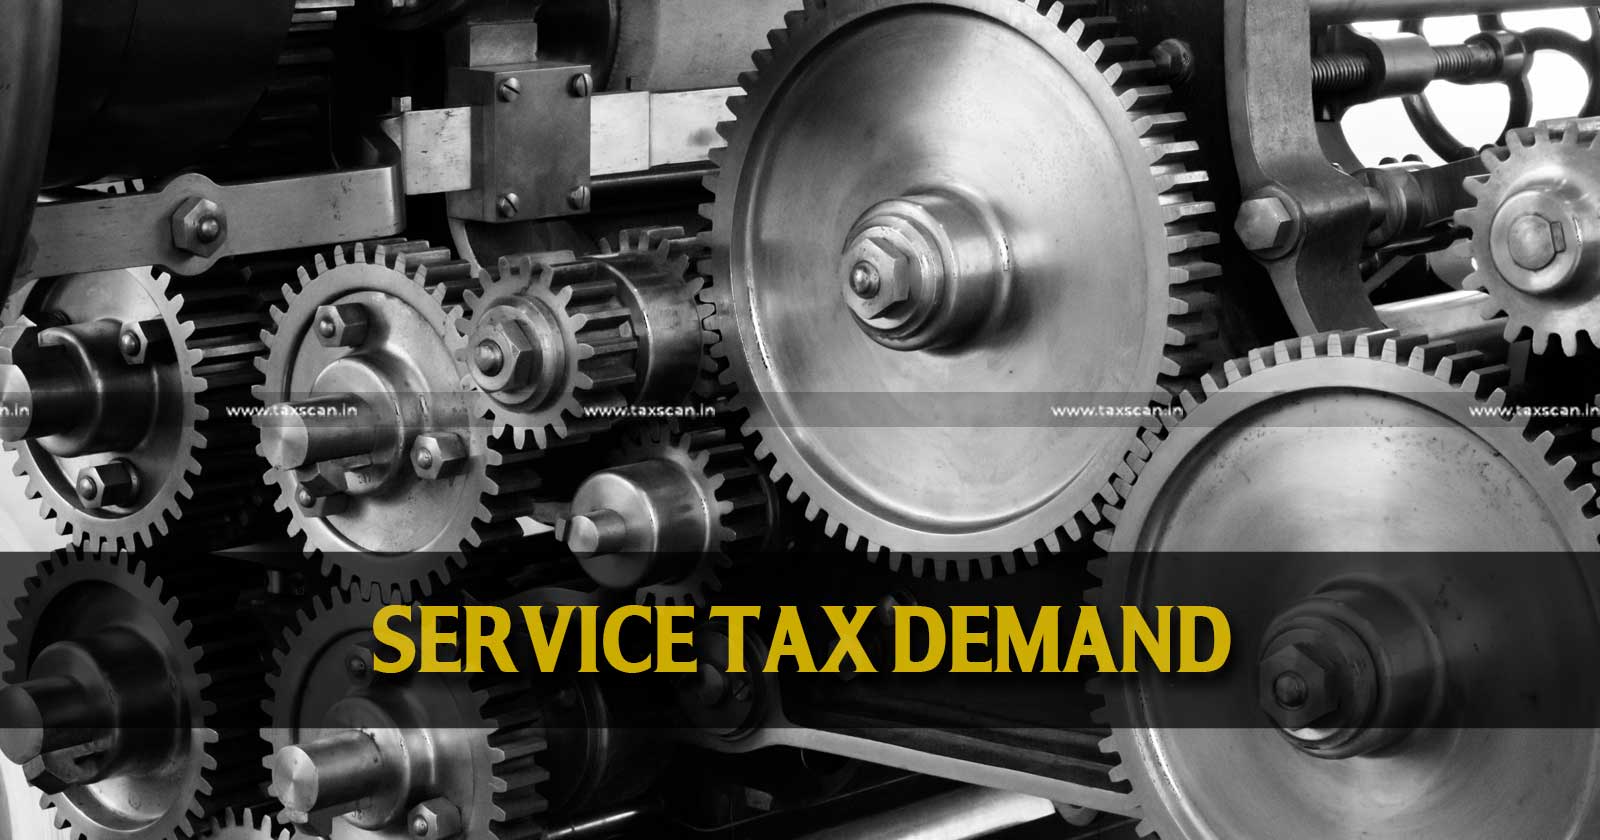 Transfer of rights of possession with Machinery not taxable service - Supply of tangible goods - CESTAT upholds demand of service tax - TAXSCAN